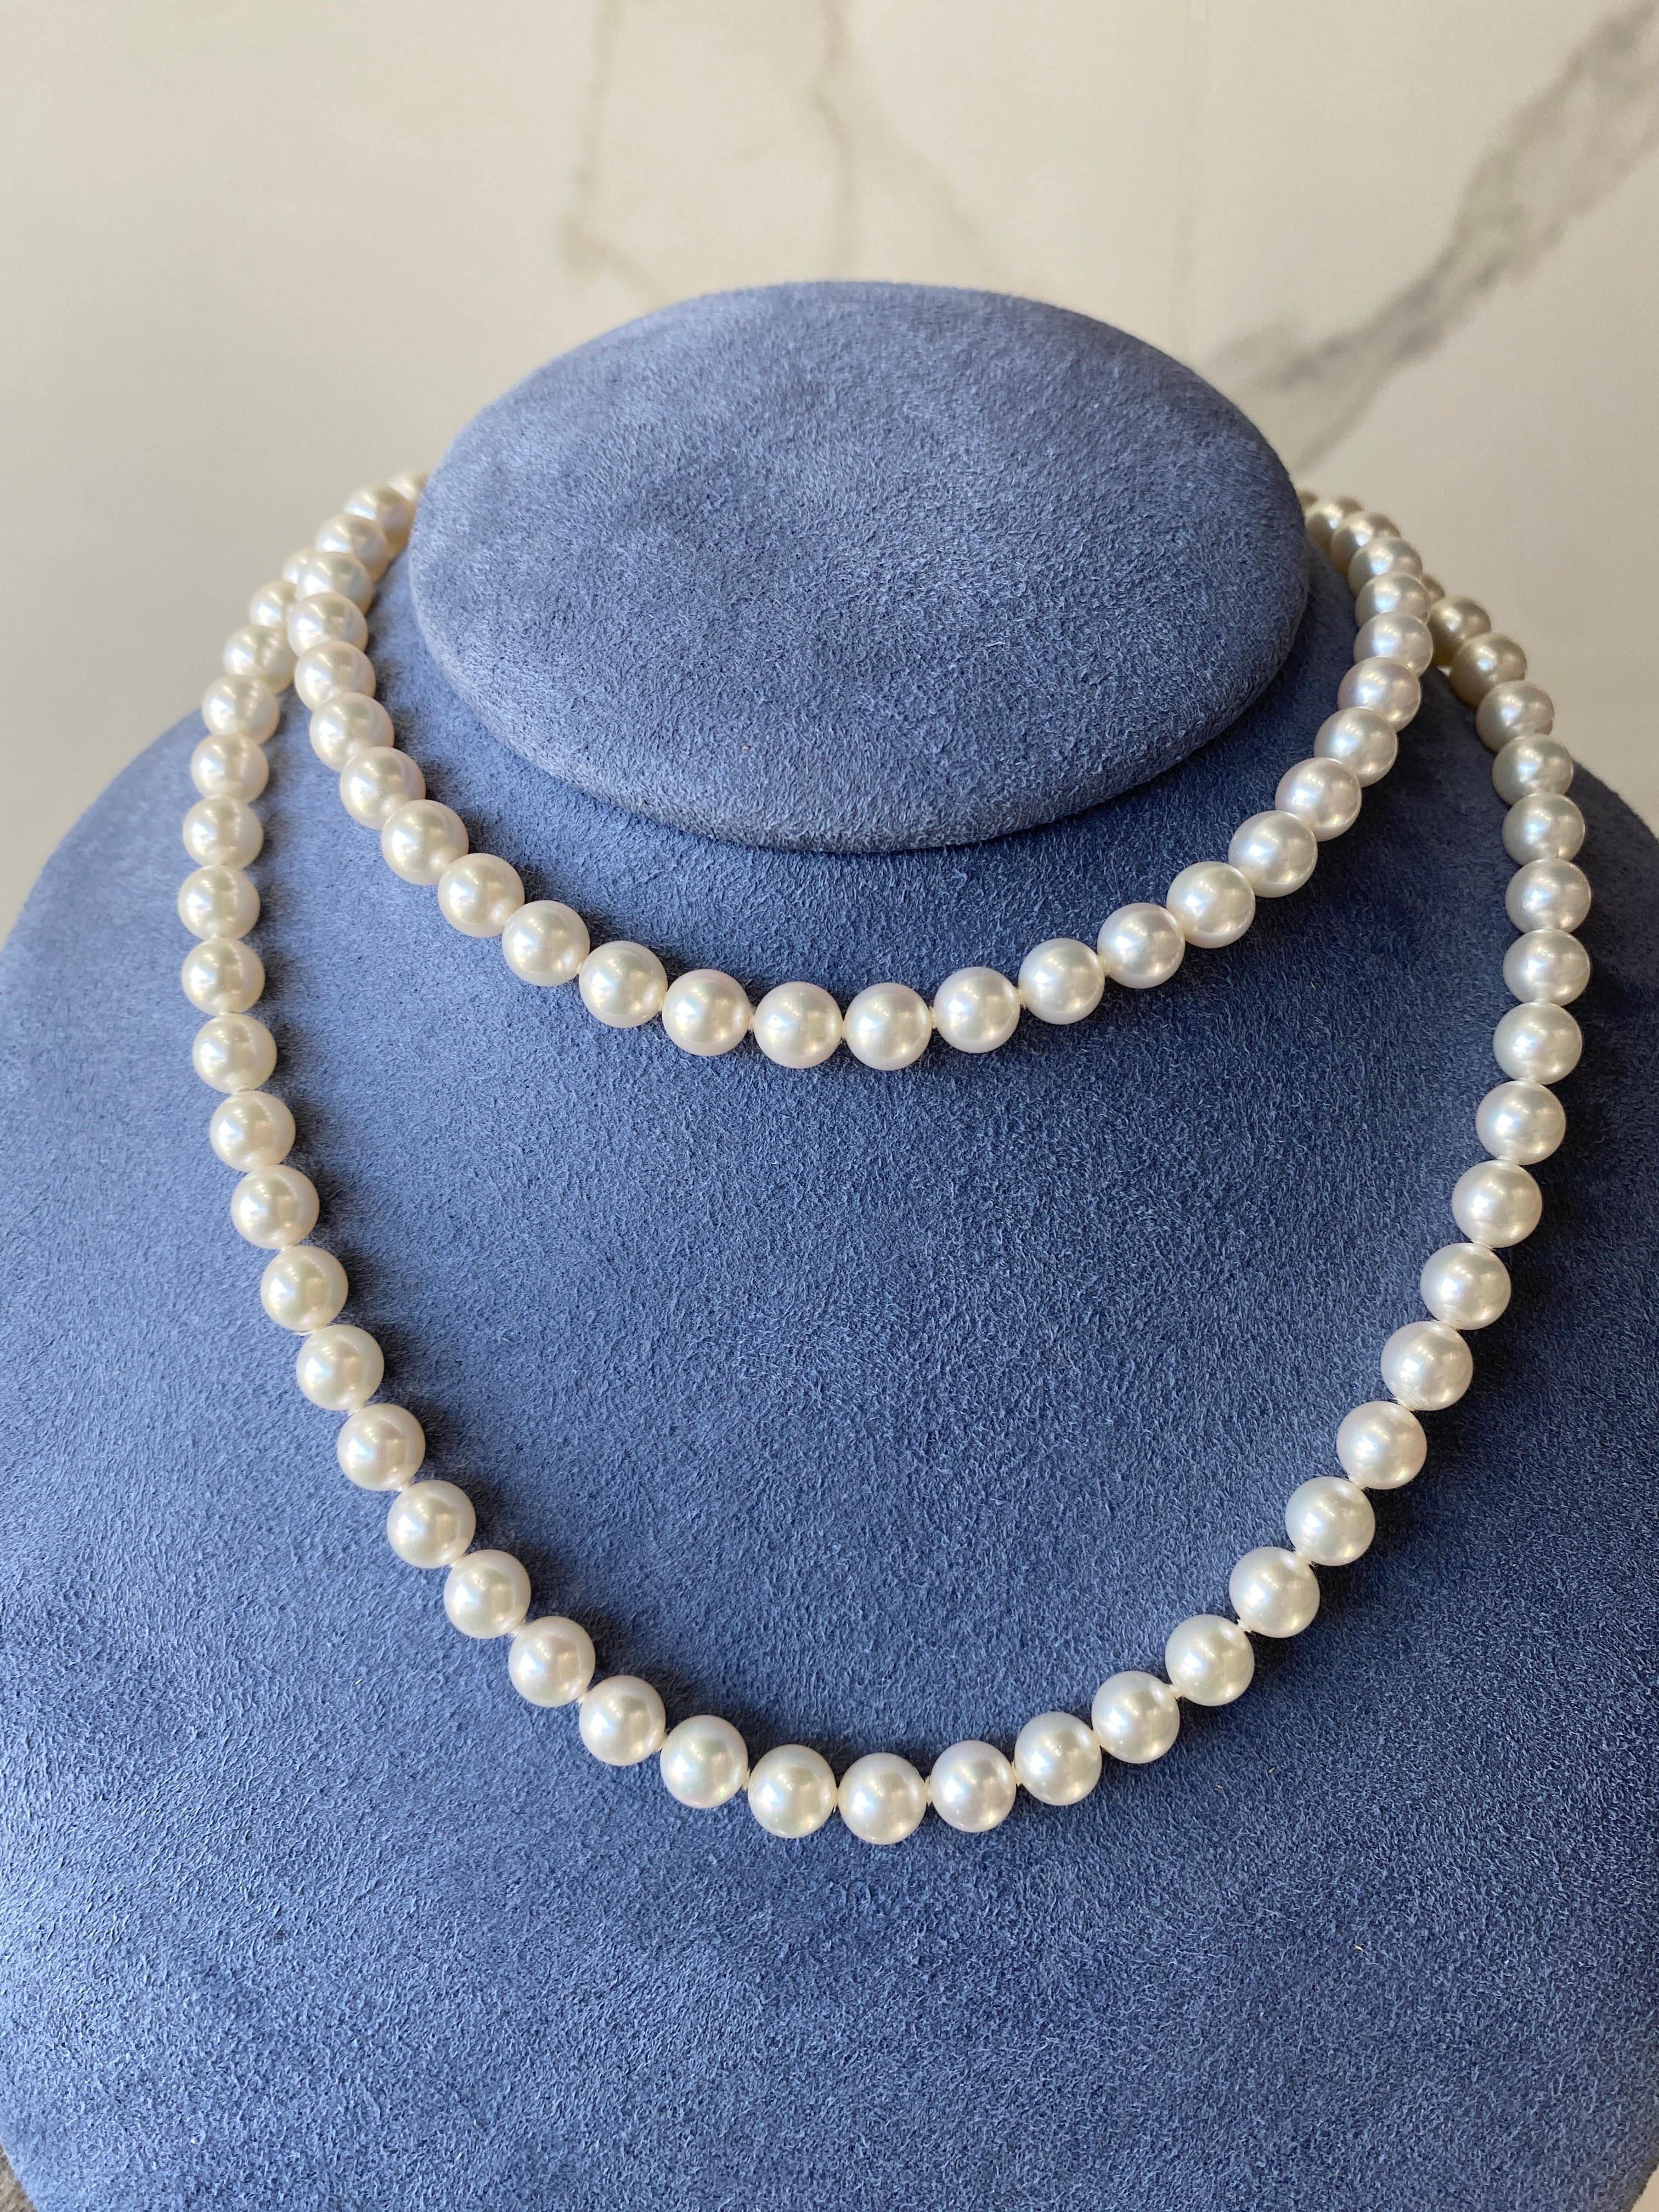 A beautiful necklace from Mikimoto, this necklace features thirty inches of superb and lustrous Akoya pearls. 18 karat yellow gold fish hook pearl clasp. It is marked 750 with the Mikimoto logo on the clasp. 
Measurements: Pearls measure